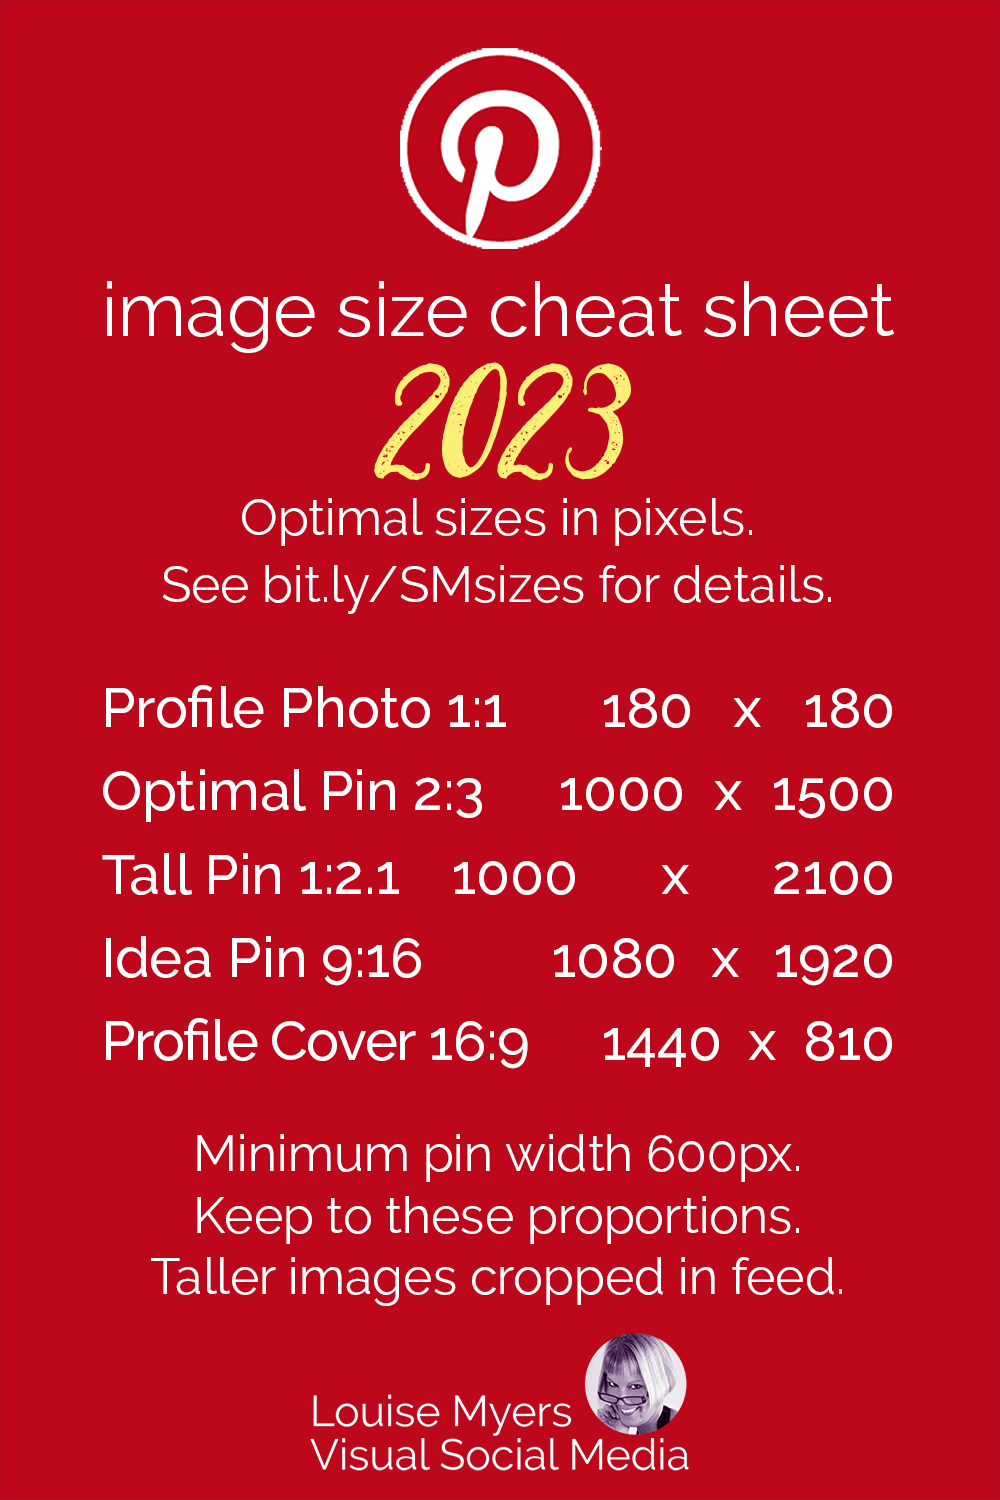 Pinterest image sizes chart on red graphic with logo.